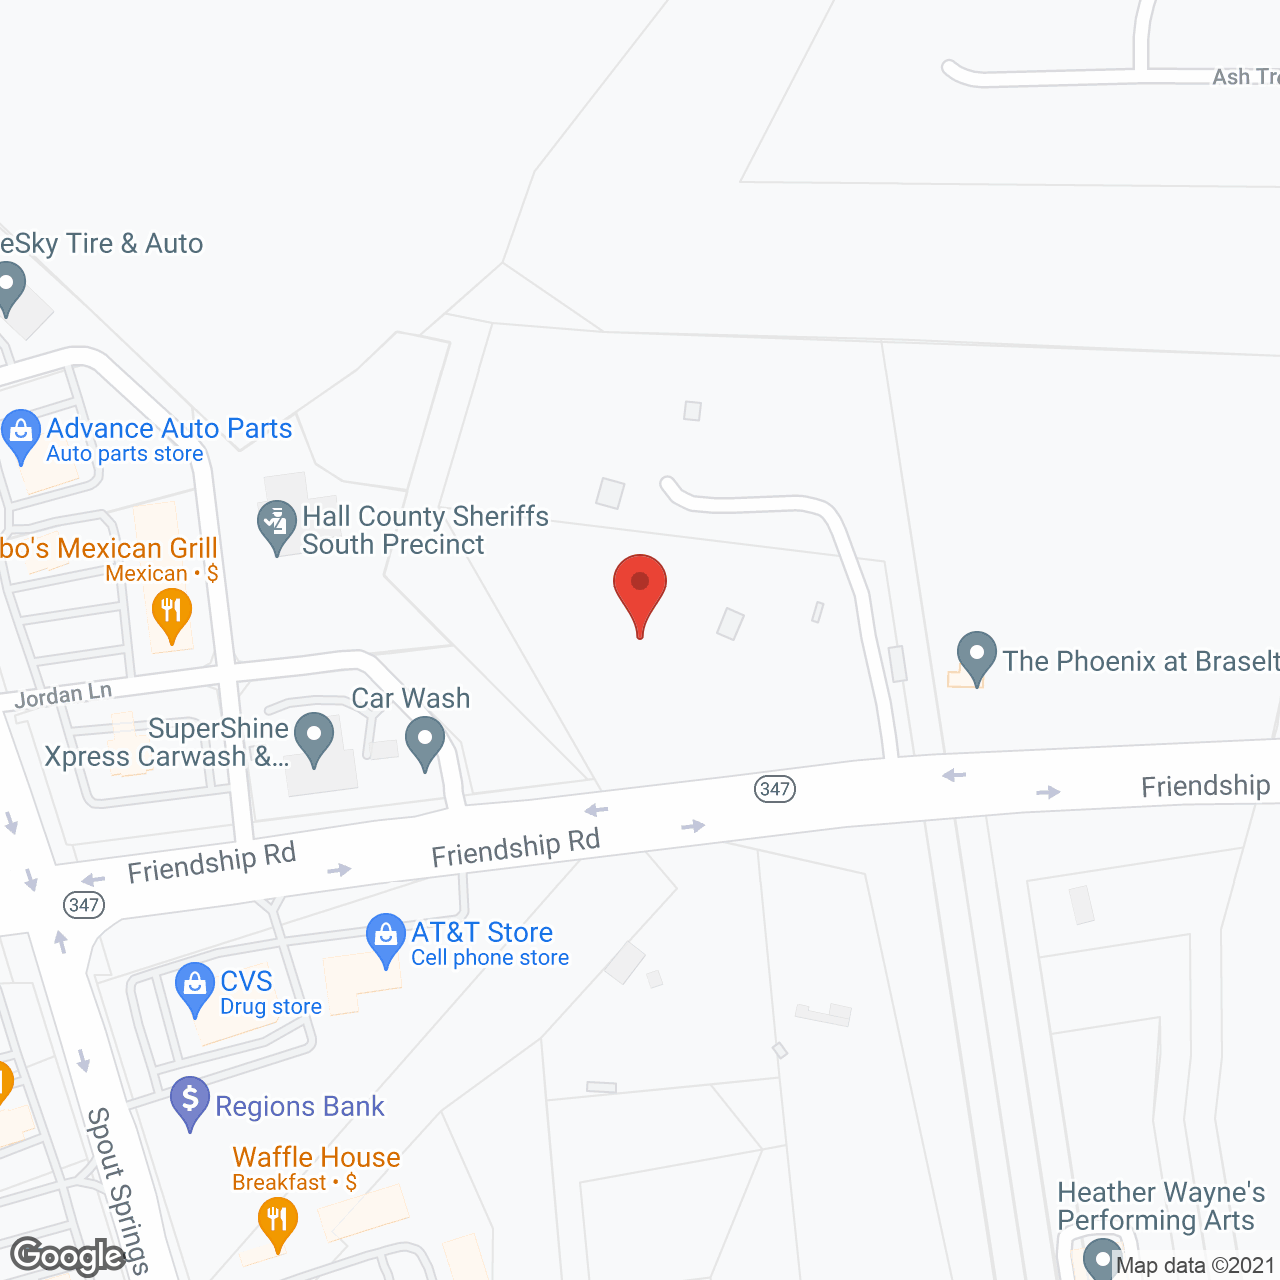 The Phoenix at Braselton in google map